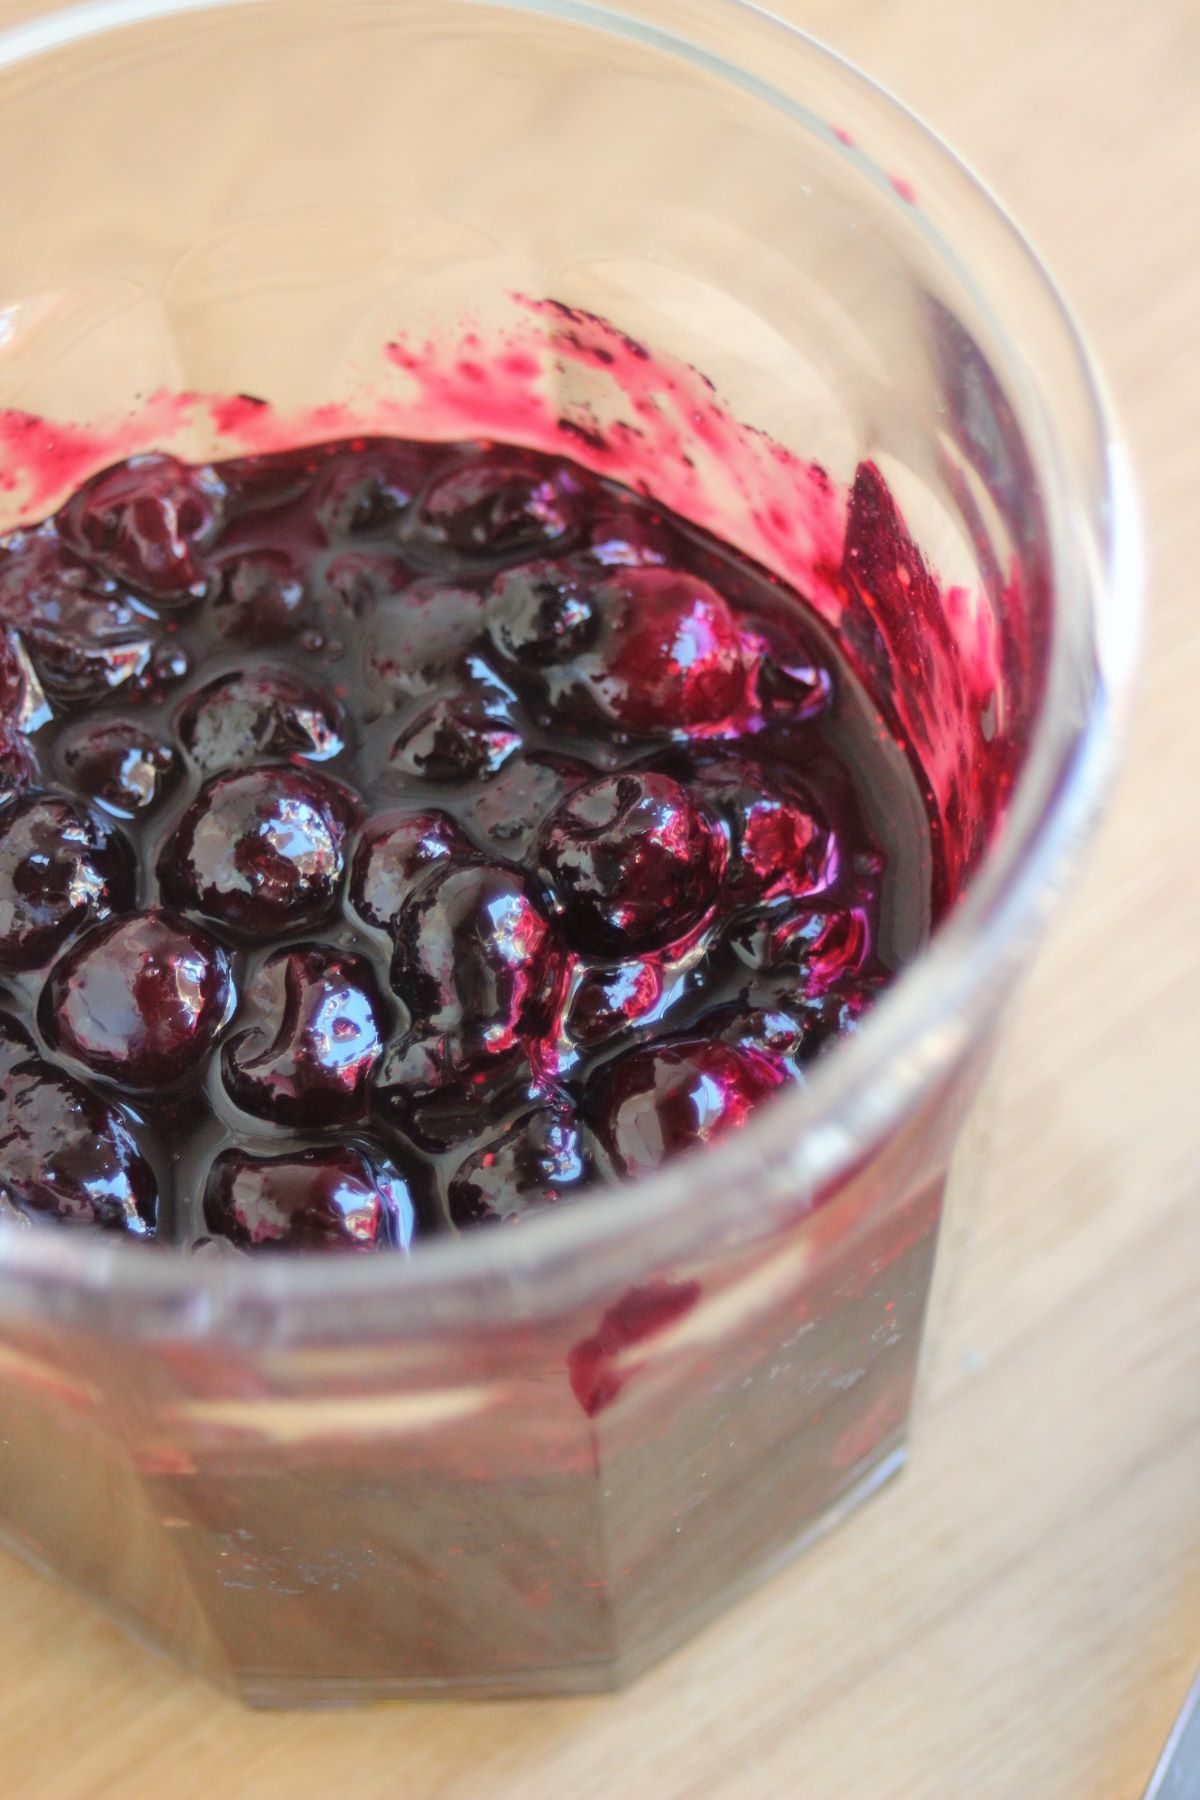 View of the inside of a jar with blueberry sauce.